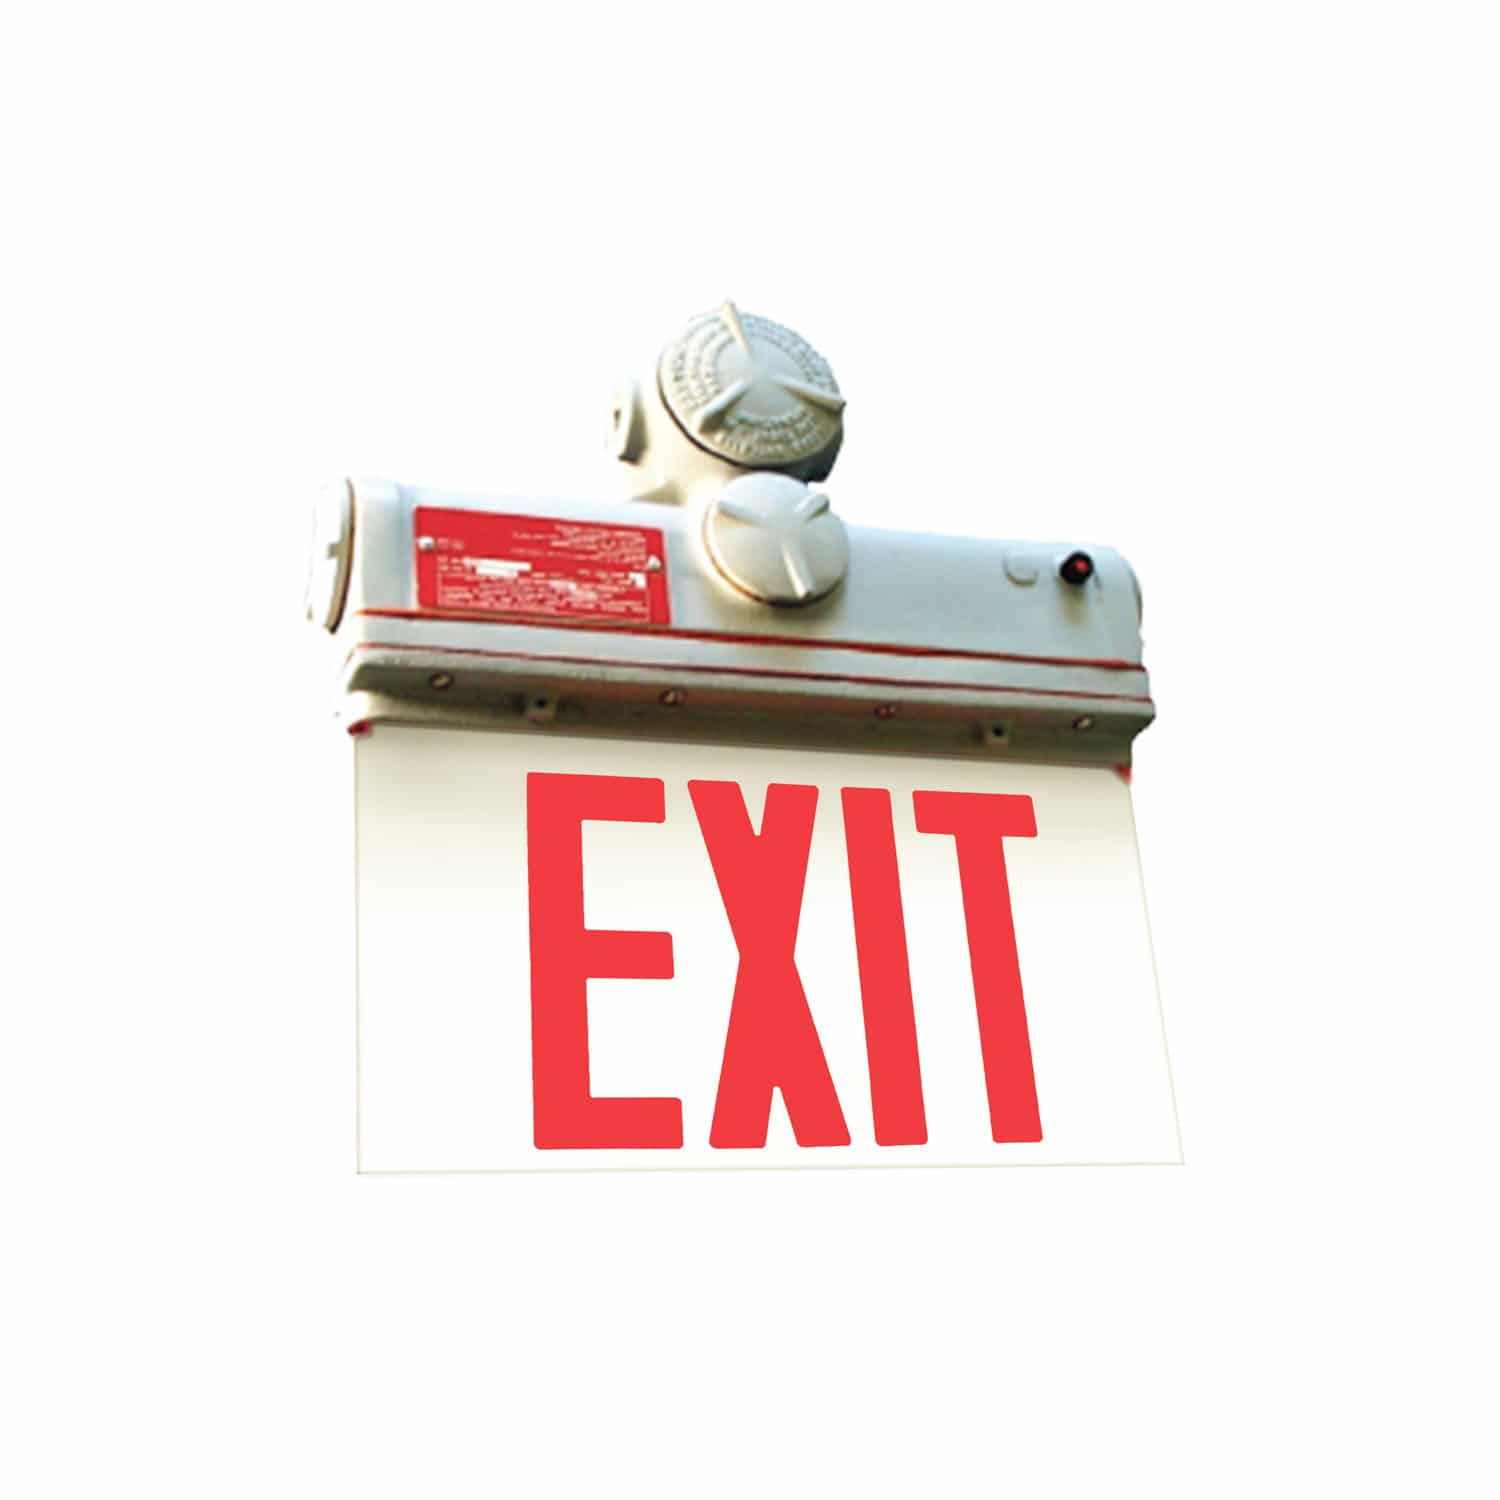 Explosion Proof LED Exit Sign, battery has a standard UL listed 3-hour run time. The Isolite EXP.